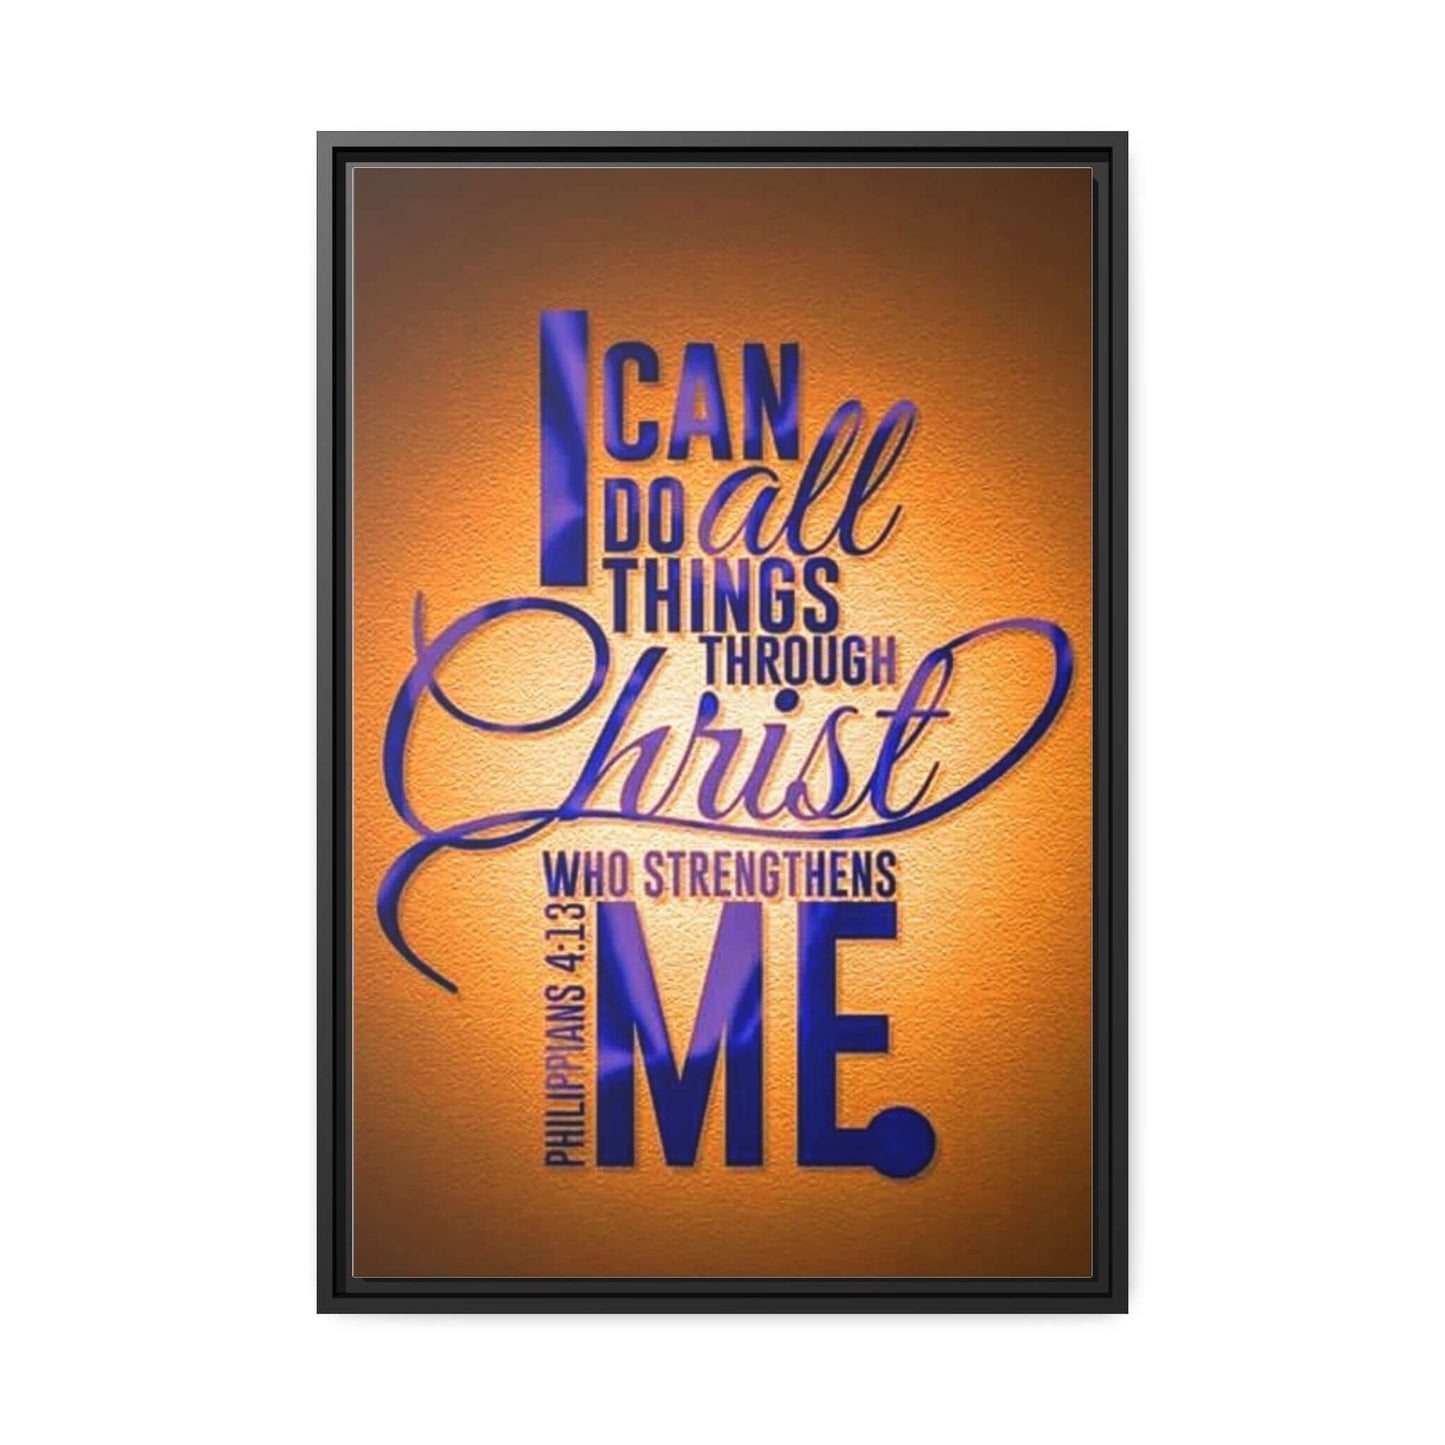 Elegant Framed Canvas Print with Inspirational Bible Verse | Art & Wall Decor,Canvas,Decor,Eco-friendly,Framed,Hanging Hardware,Home & Living,Summer Picks,Sustainable